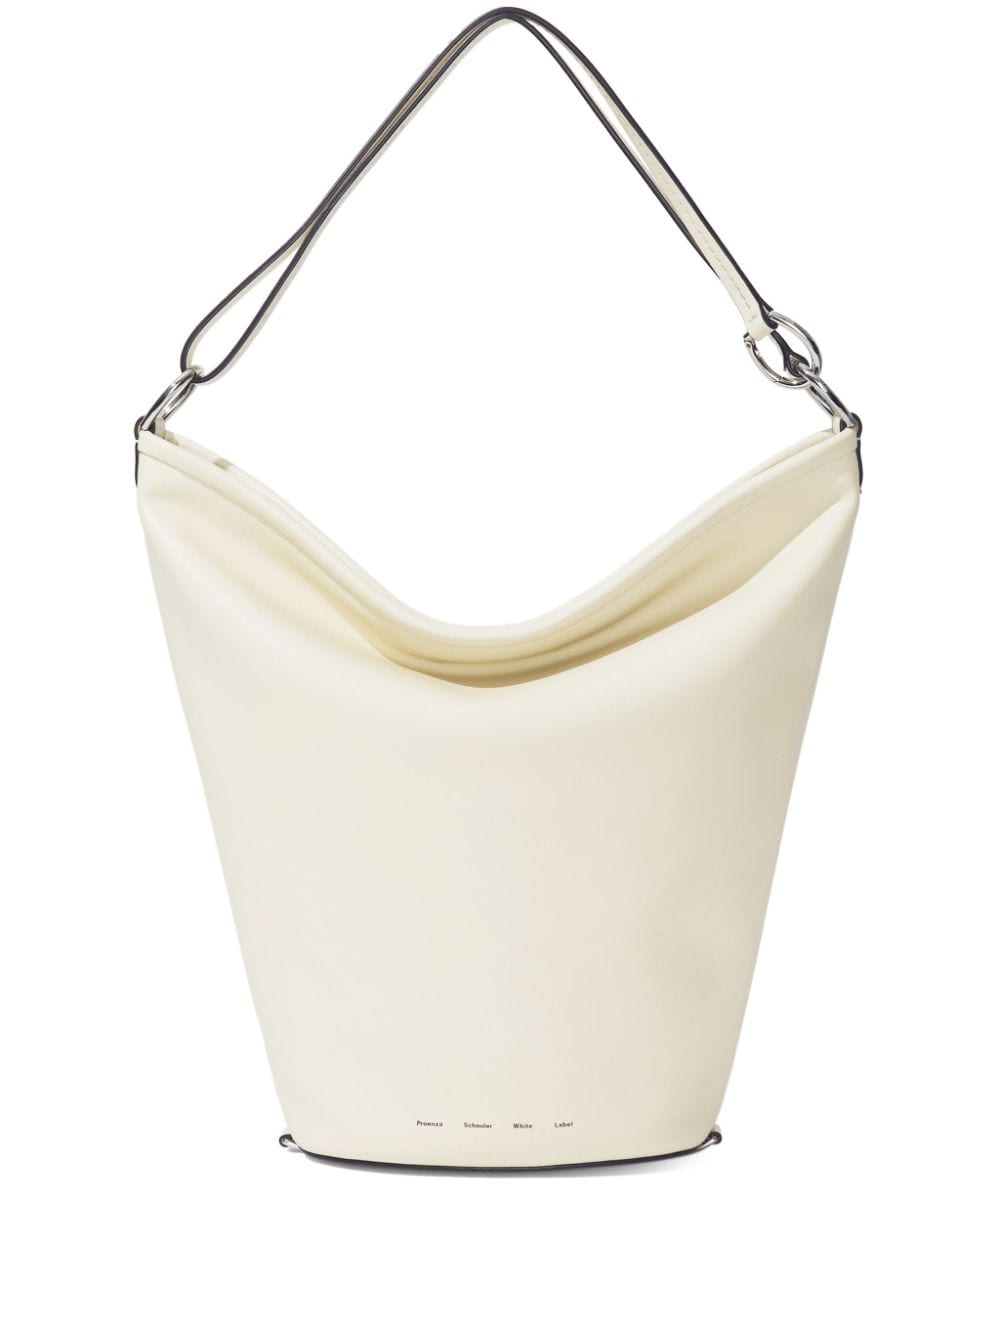 Proenza Schouler White Label Sling leather bucket bag von Proenza Schouler White Label